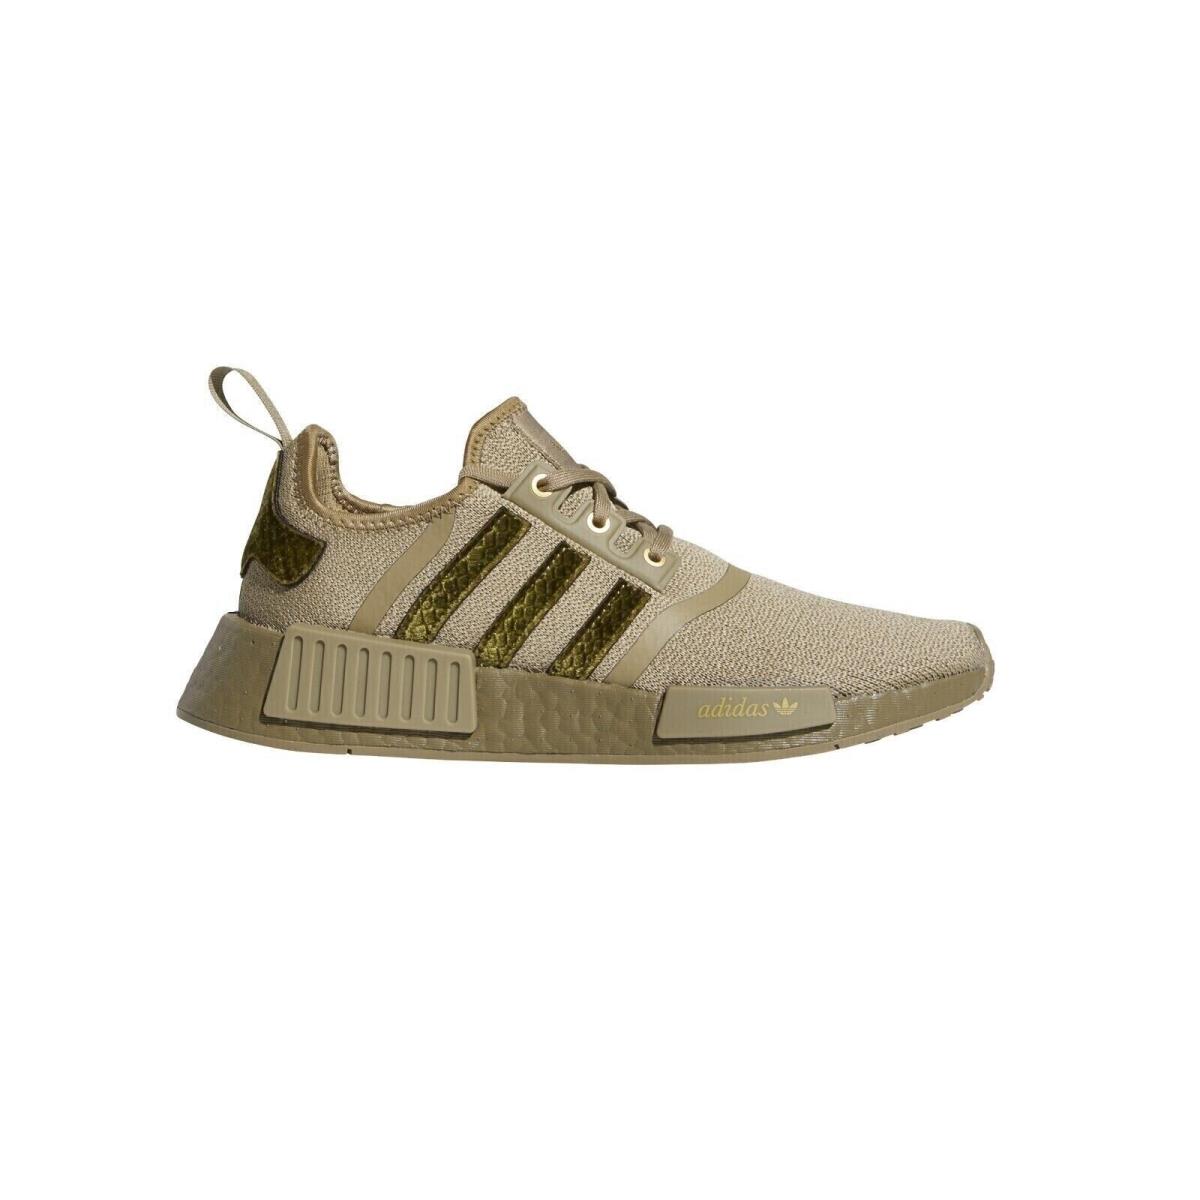 Adidas Womens NMD_R1 W Size 7 Running Shoes GY1321